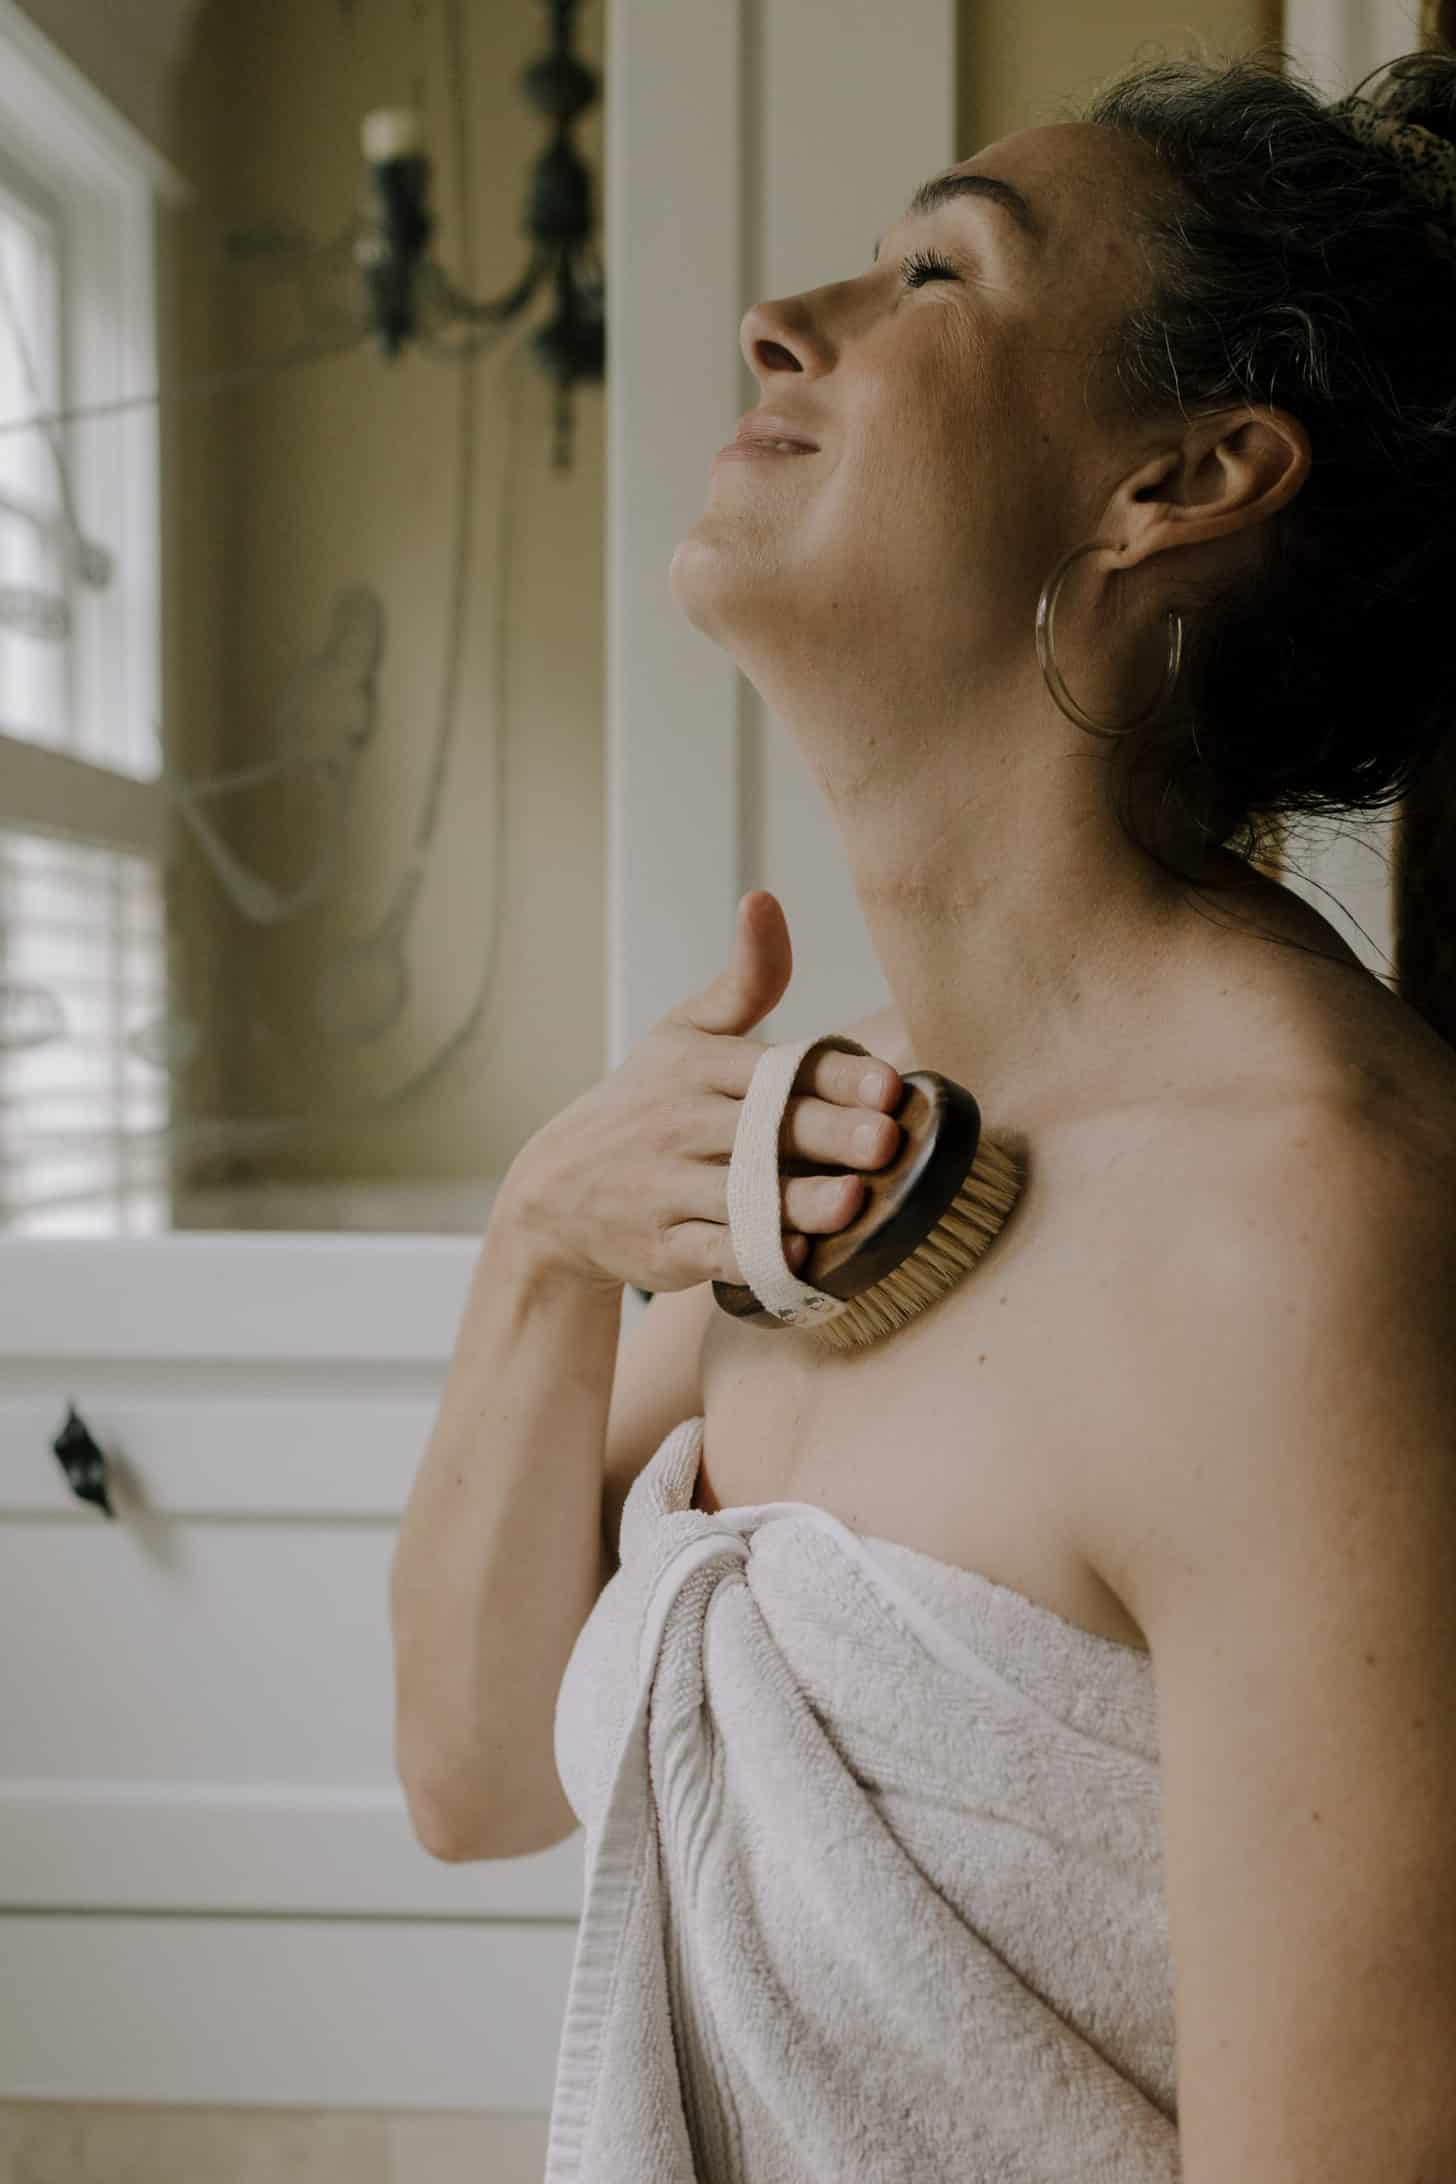 a woman dry brushes her skin while wearing a towel